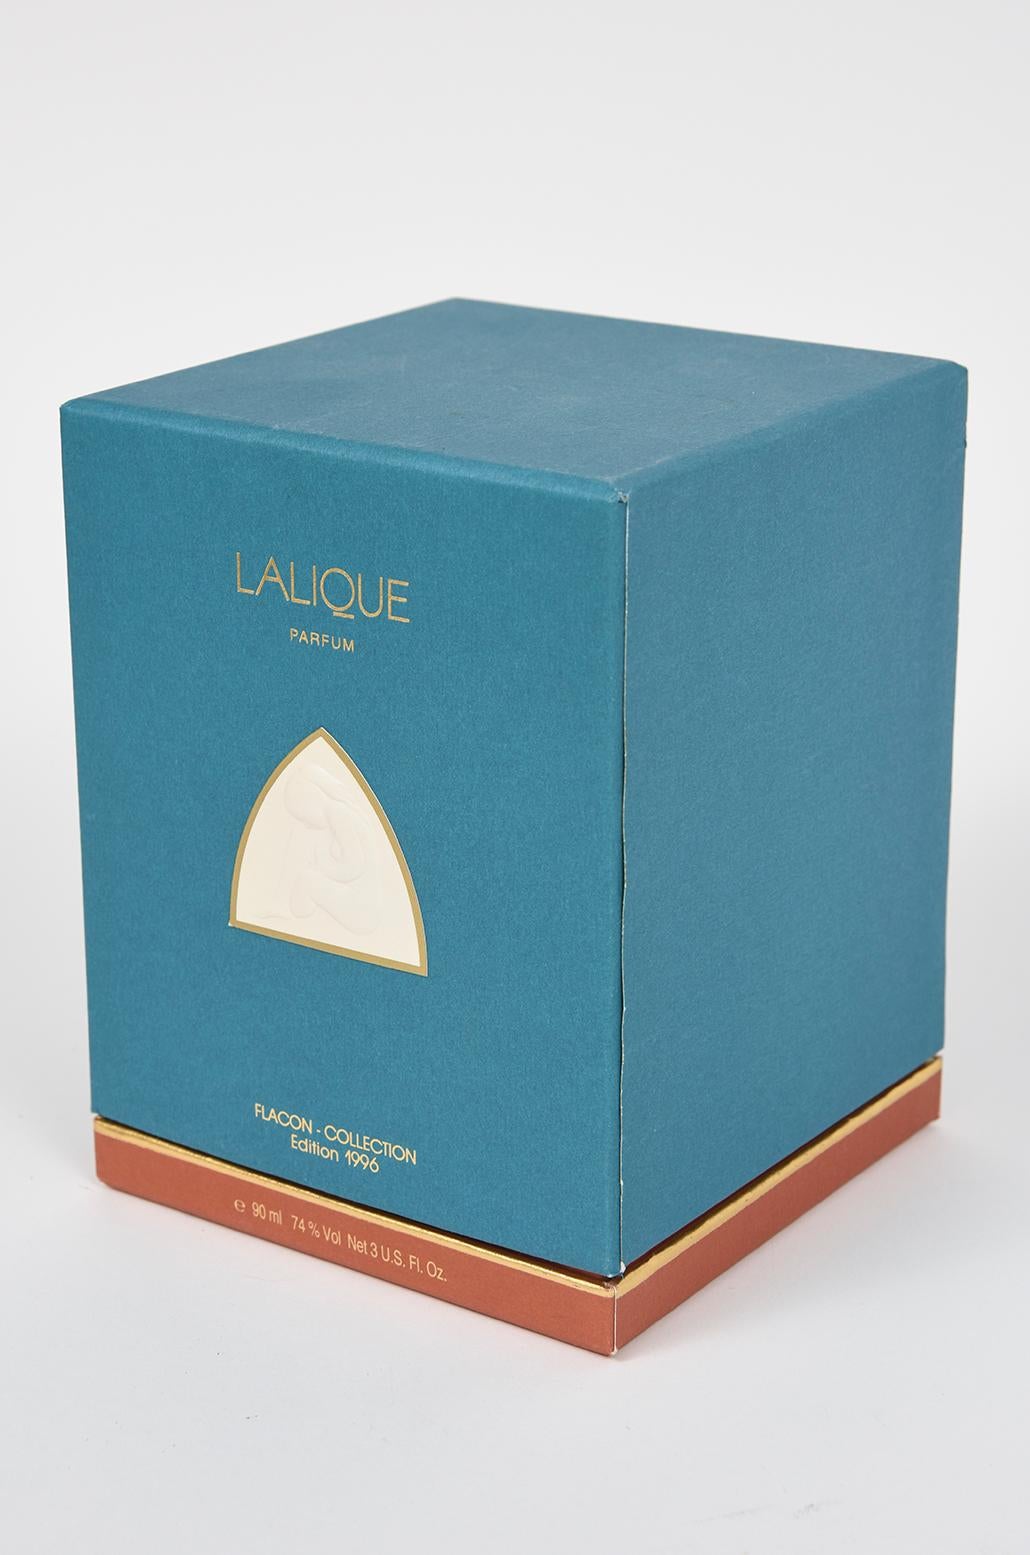 Lalique 1996 Le Nu Flacon Perfume Numbered Limited Edition Large 3 Oz. For Sale 2